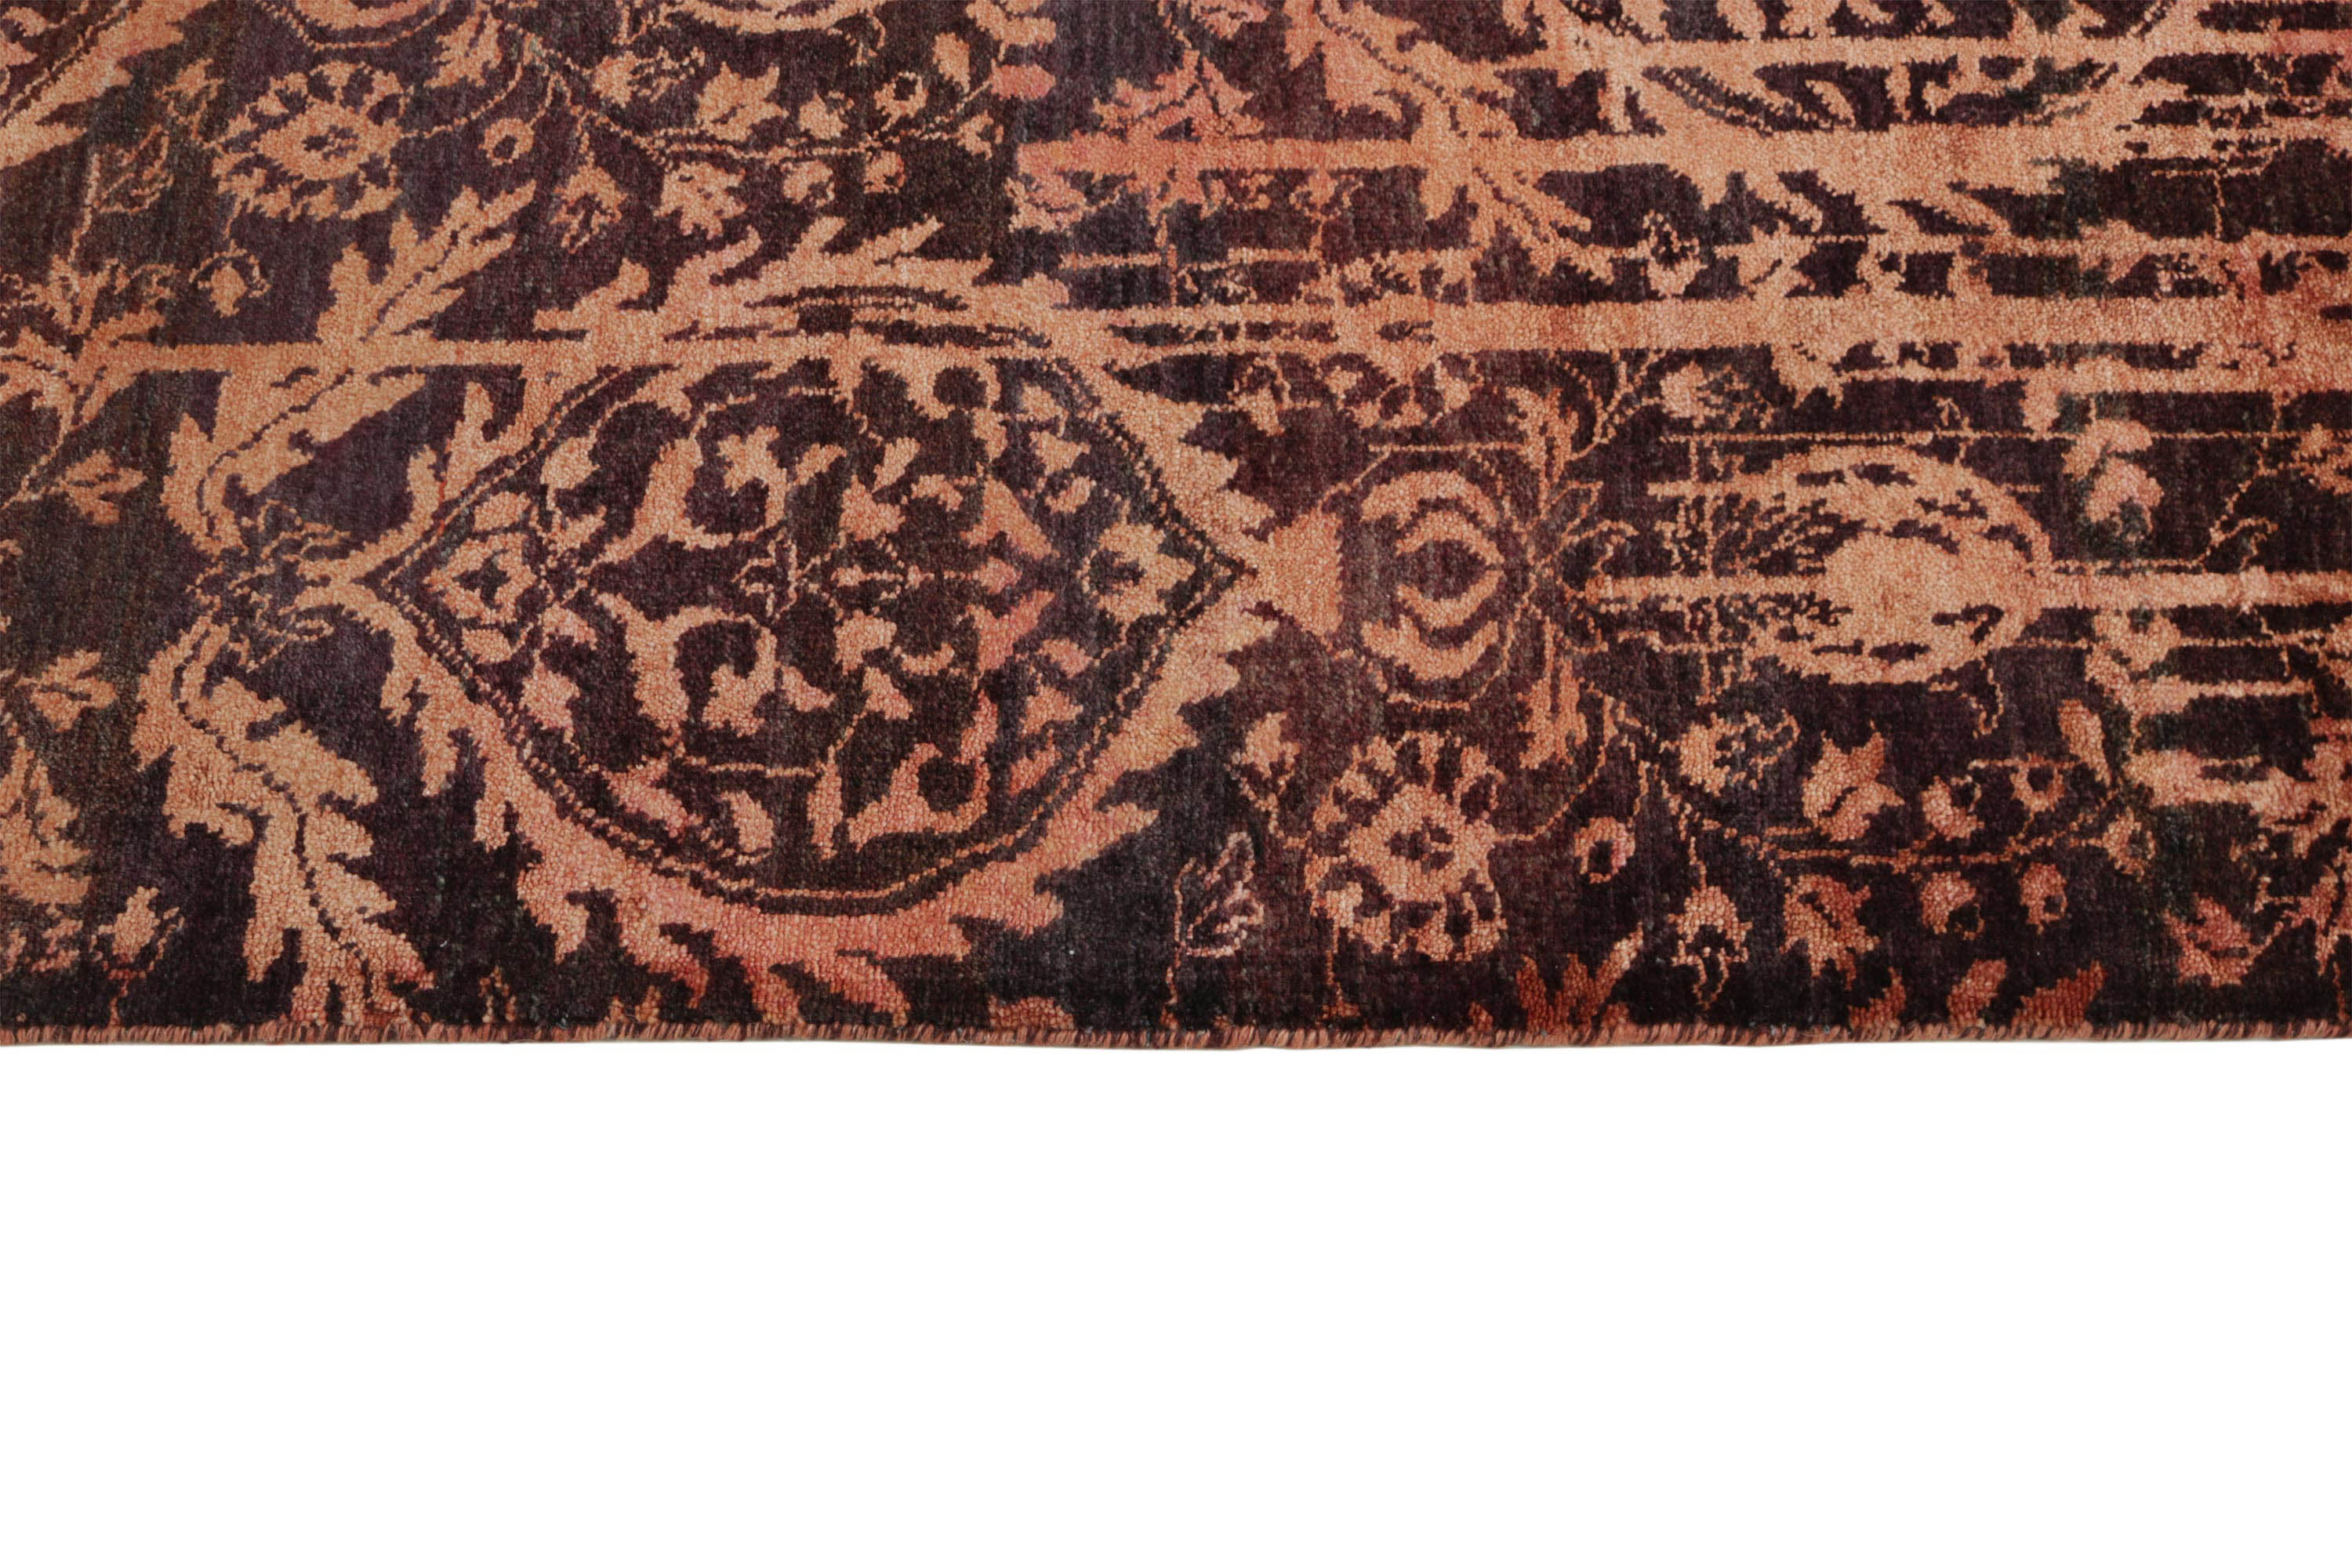 Authentic oriental rug with a damask pattern in red